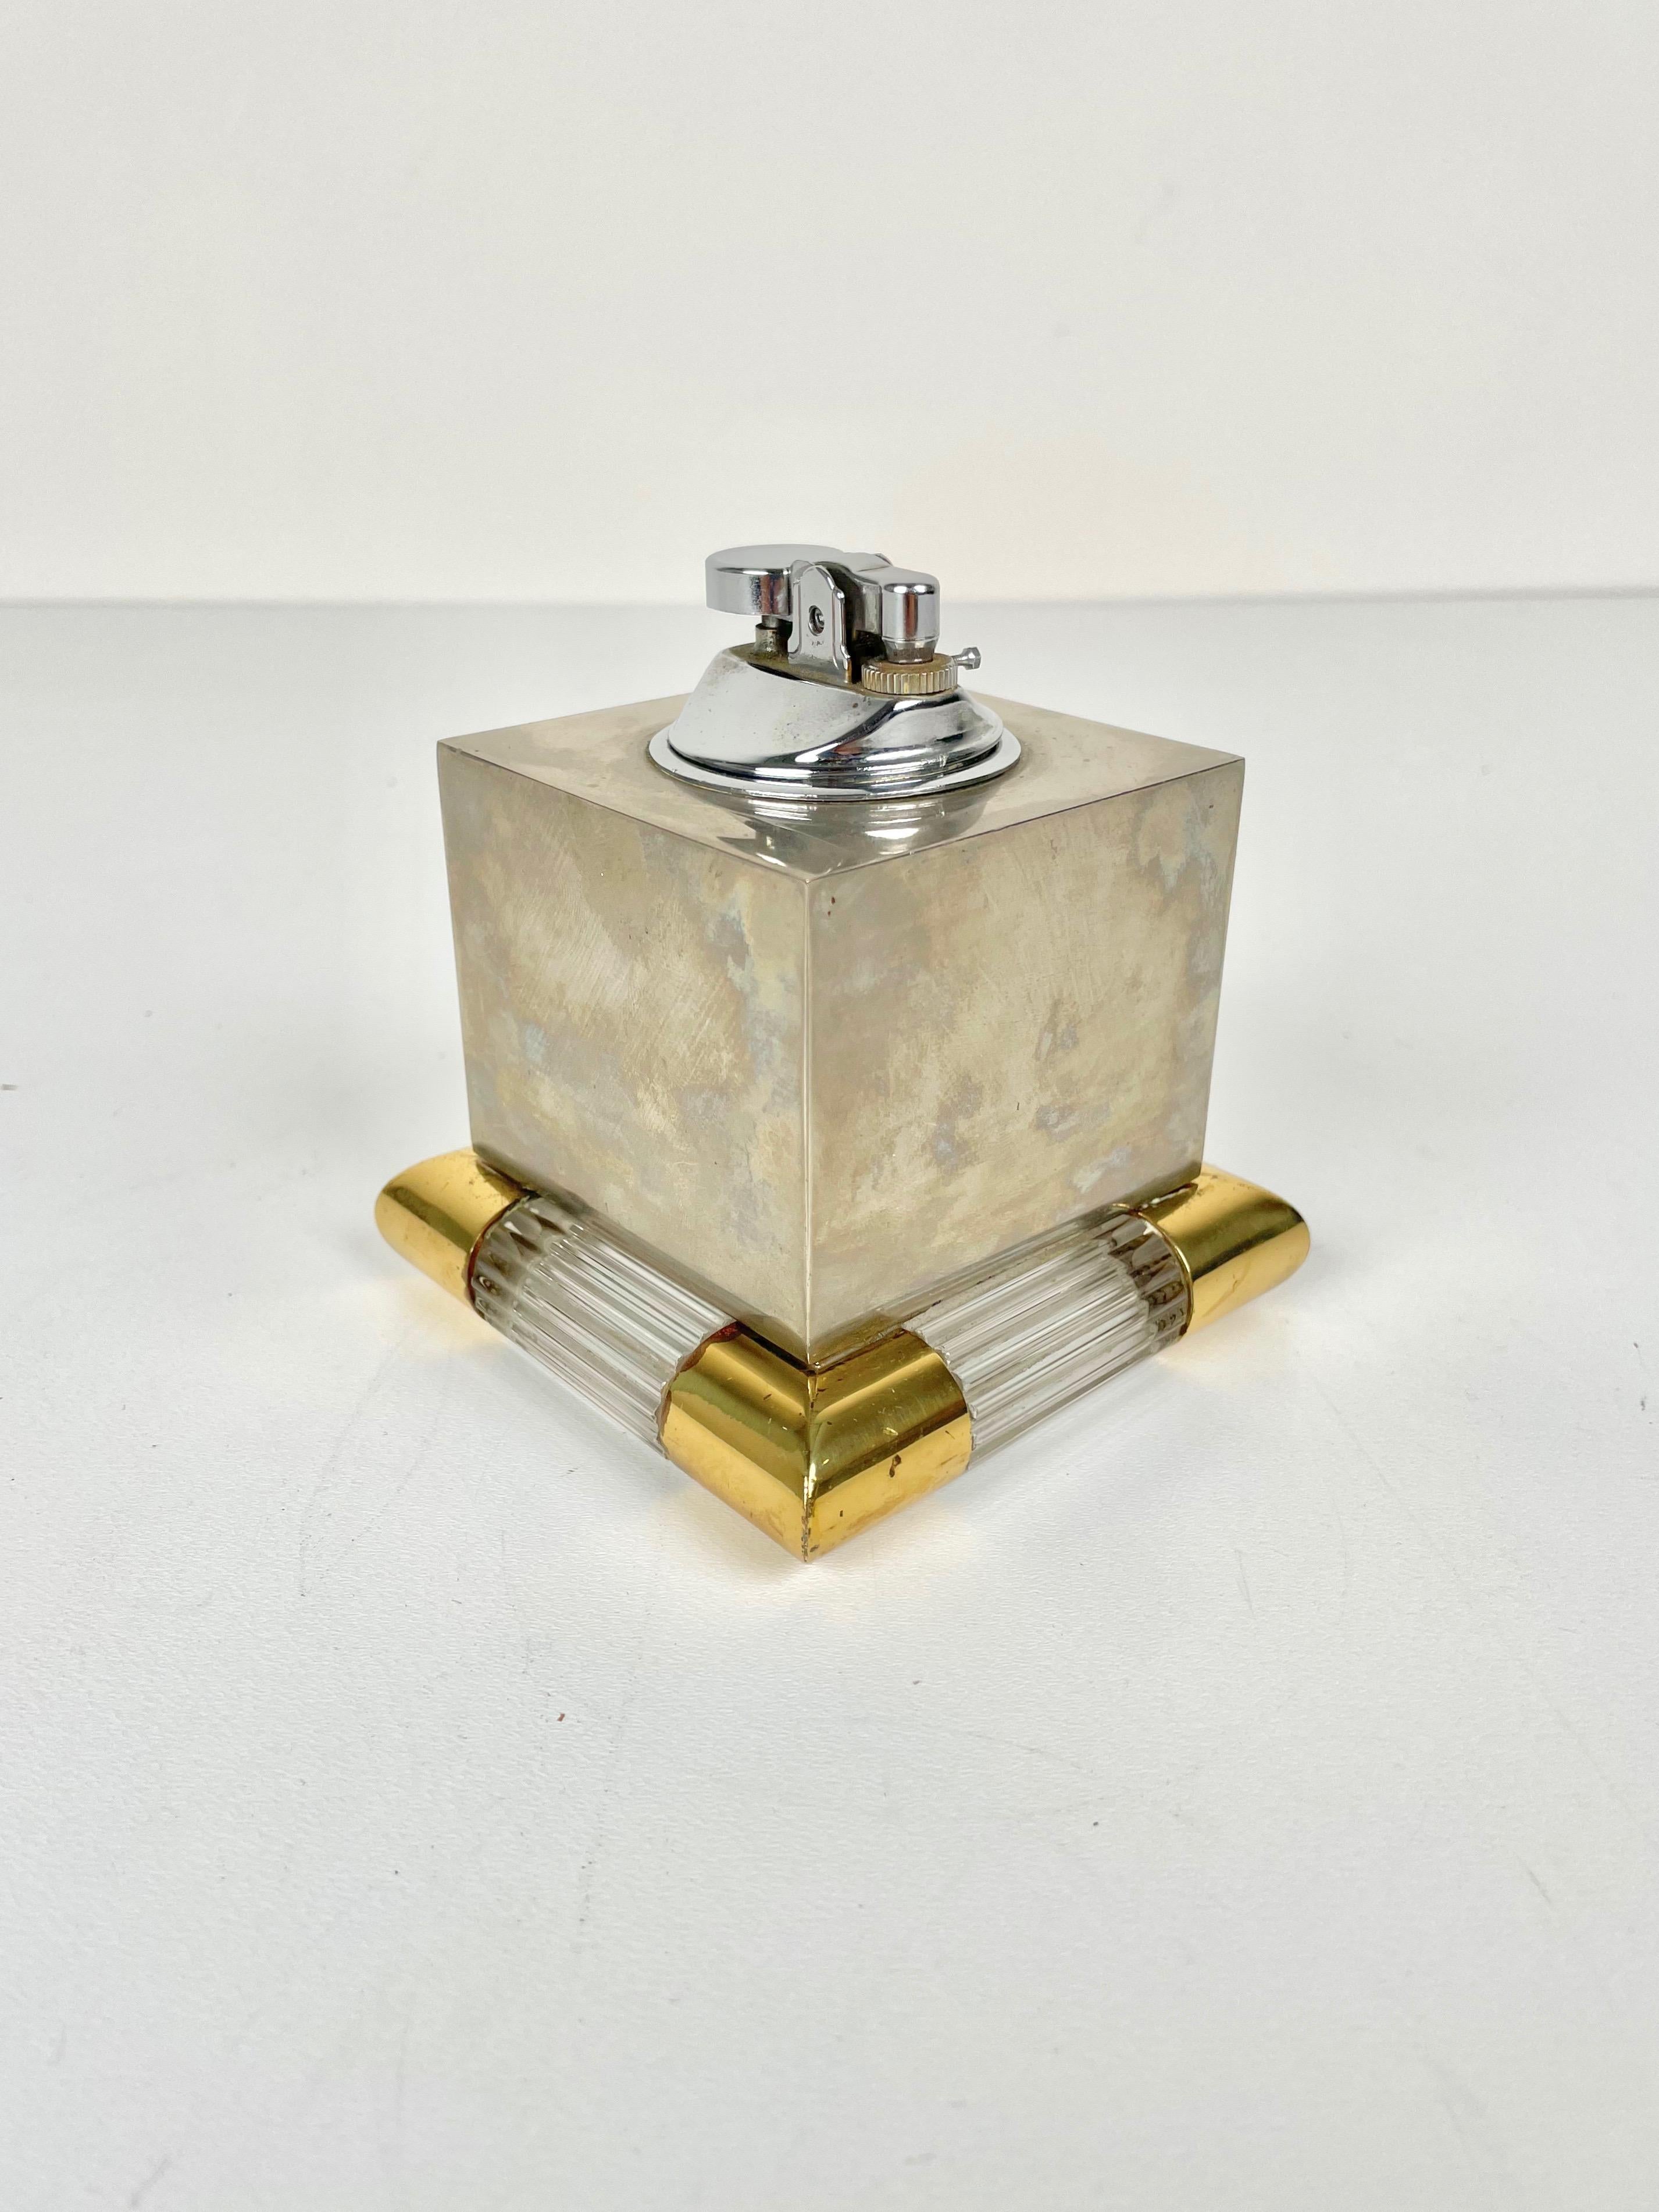 Elegant table lighter in steel featuring a Murano glass base with brass borders made by the Italian designer Tommaso Barbi in Italy in the 1970s. 

Tommaso Barbi's signature is engraved on the bottom together with the text 